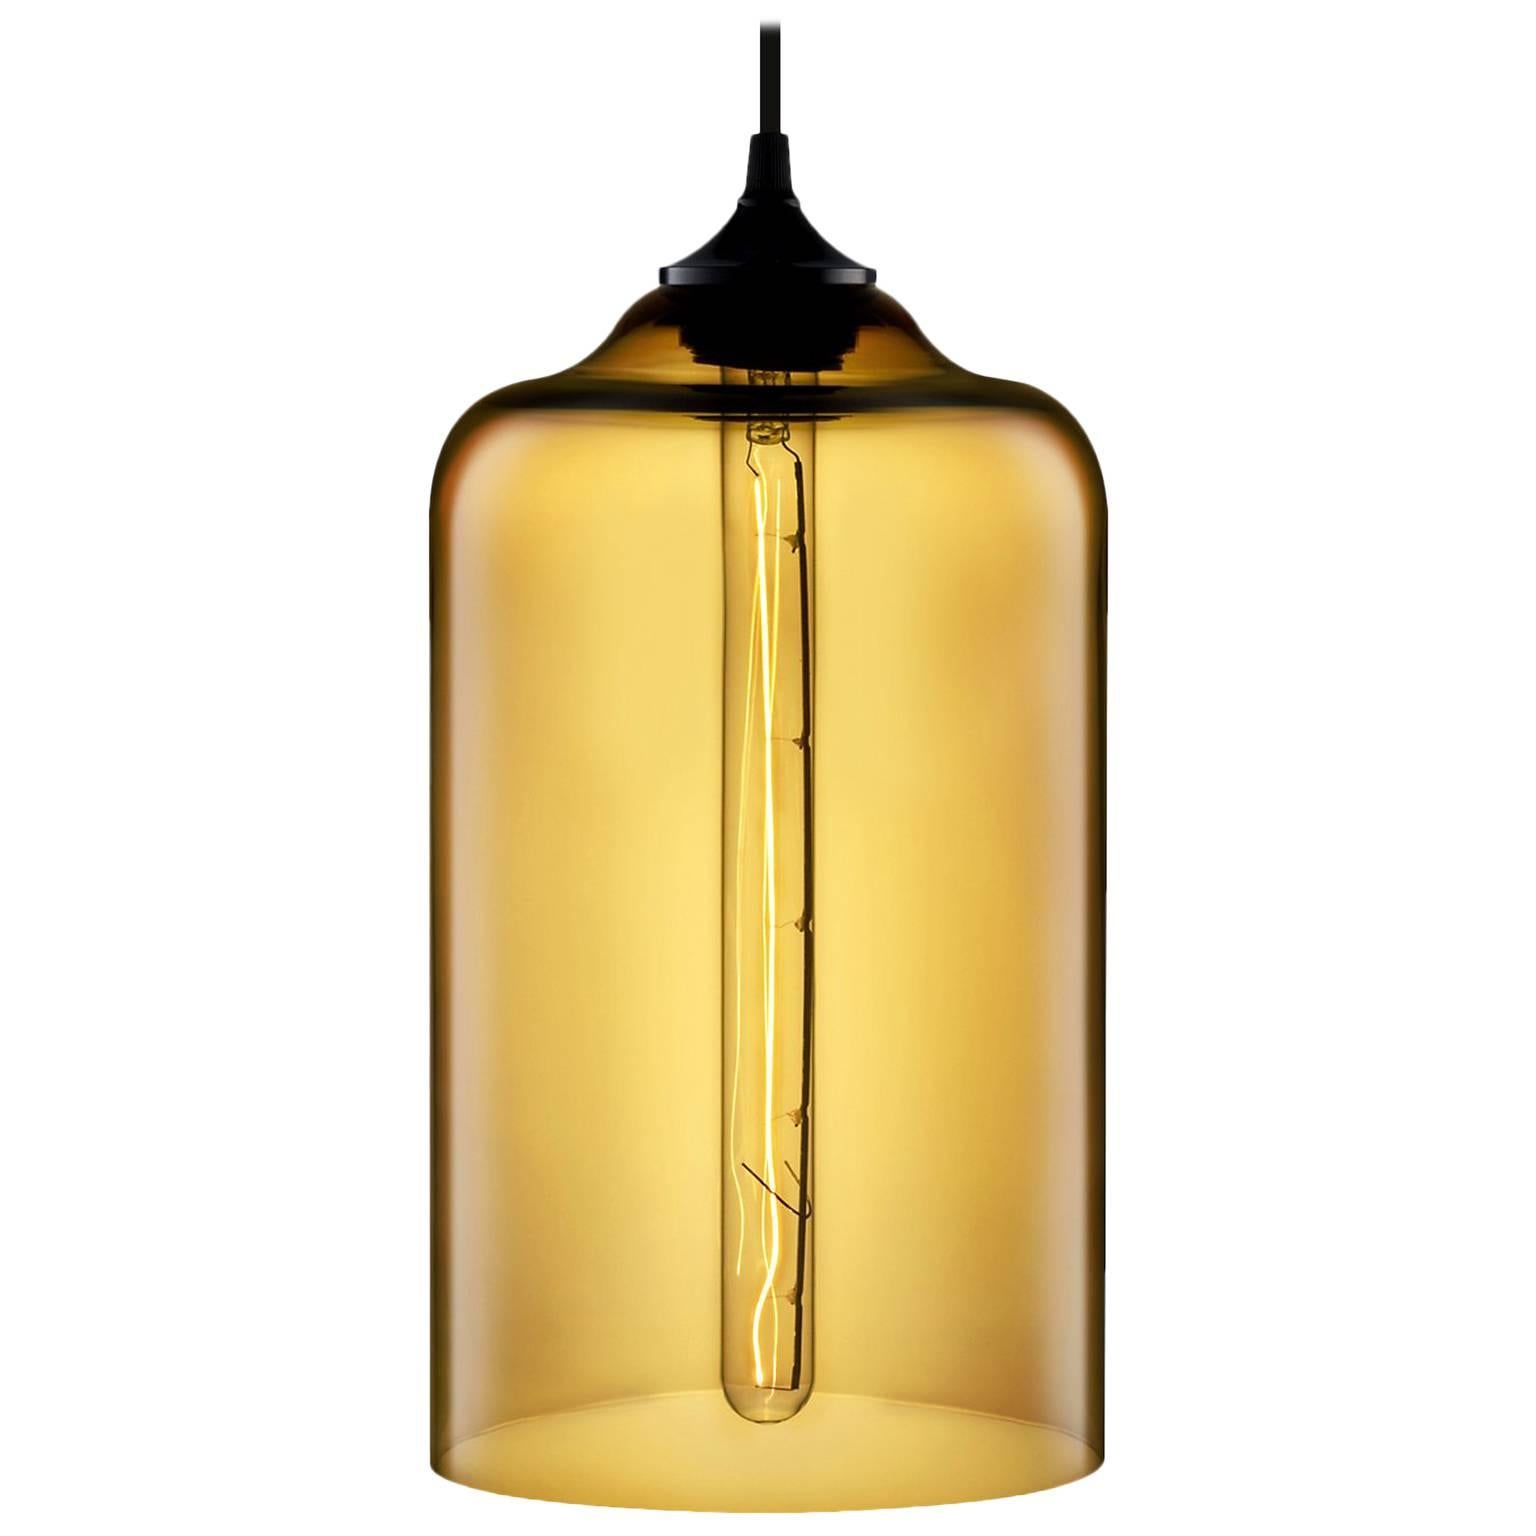 Bella Amber Handblown Modern Glass Pendant Light, Made in the USA For Sale